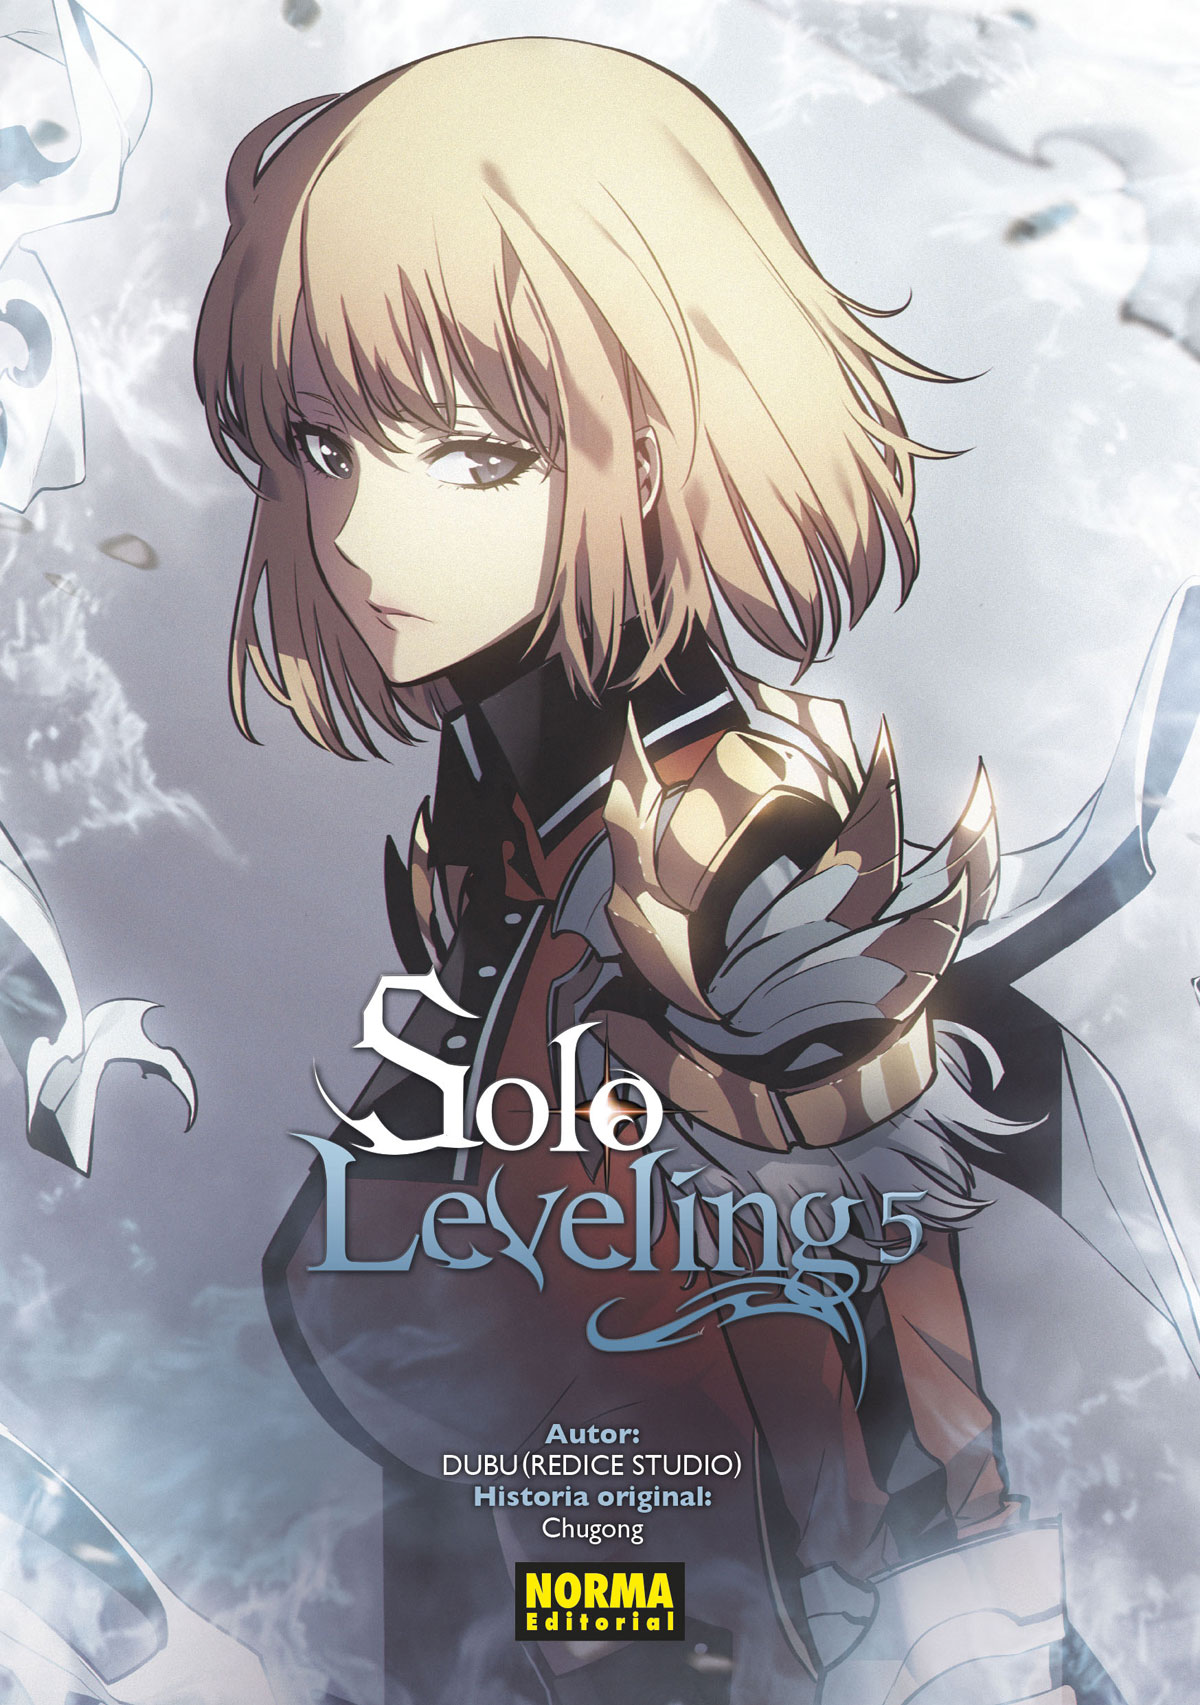 SOLO LEVELING 5 - Norma Editorial